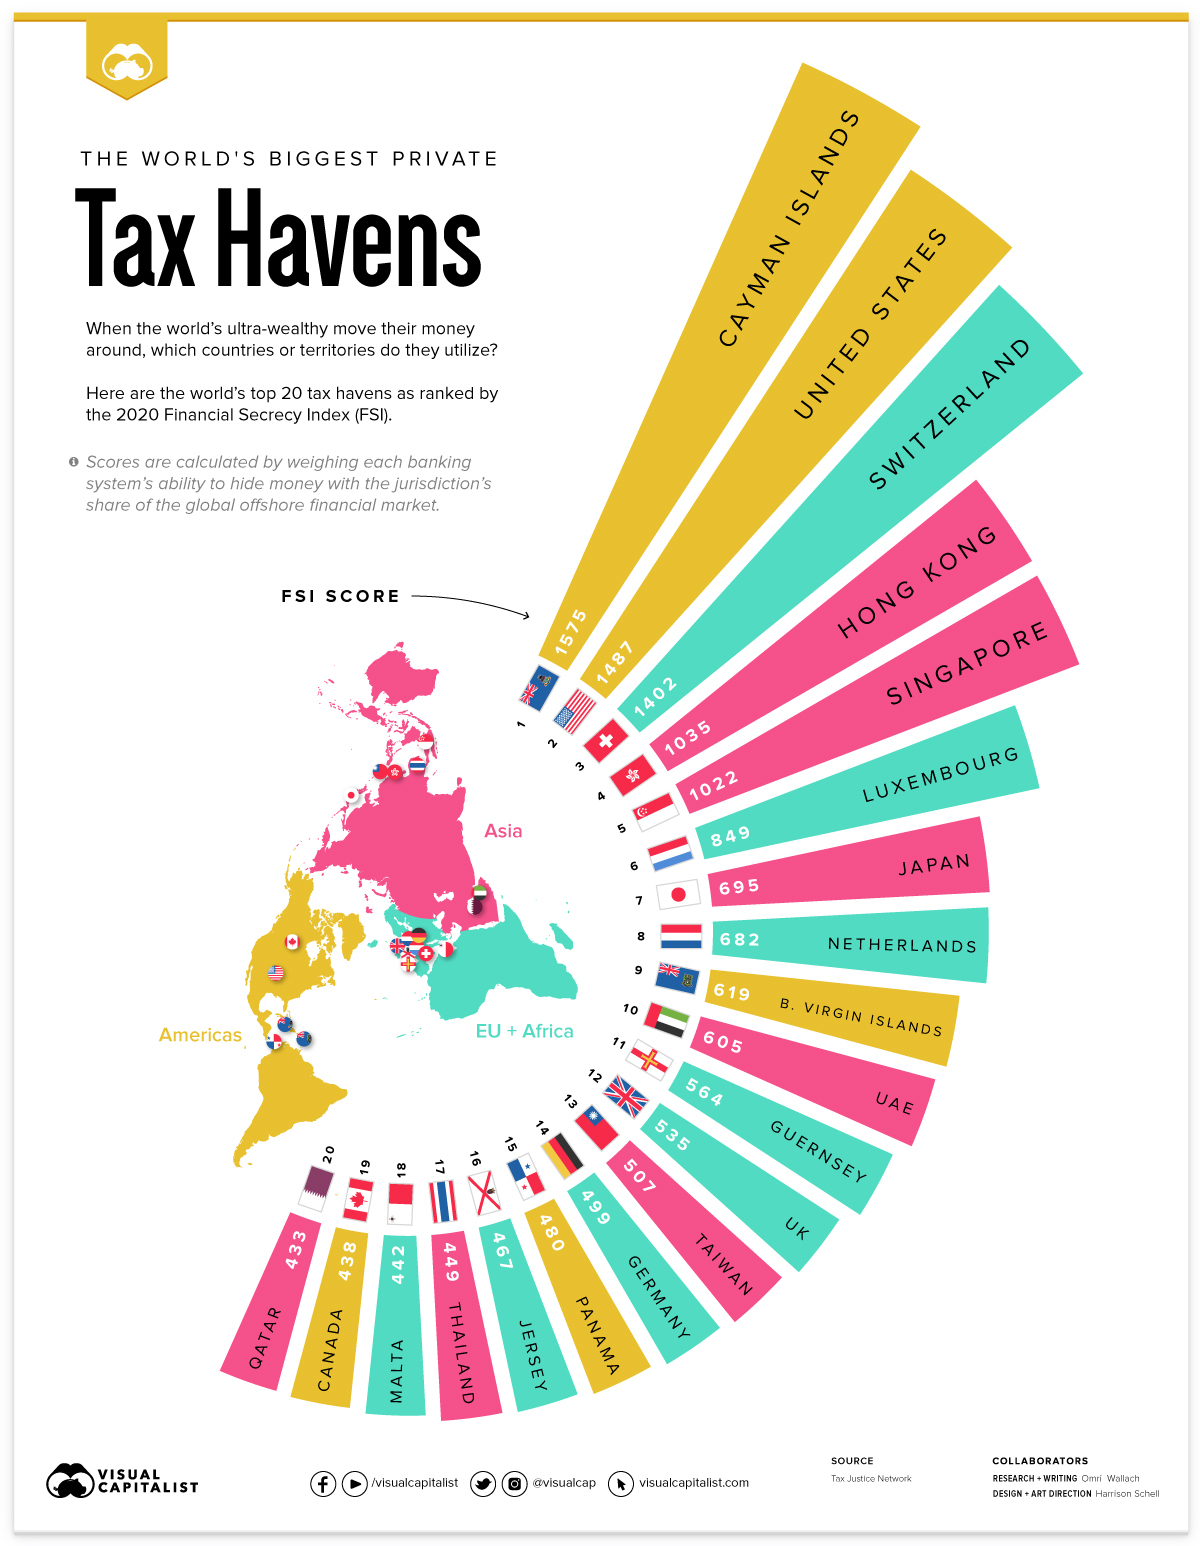 Mapped: The World's Biggest Private Tax Havens in 2021